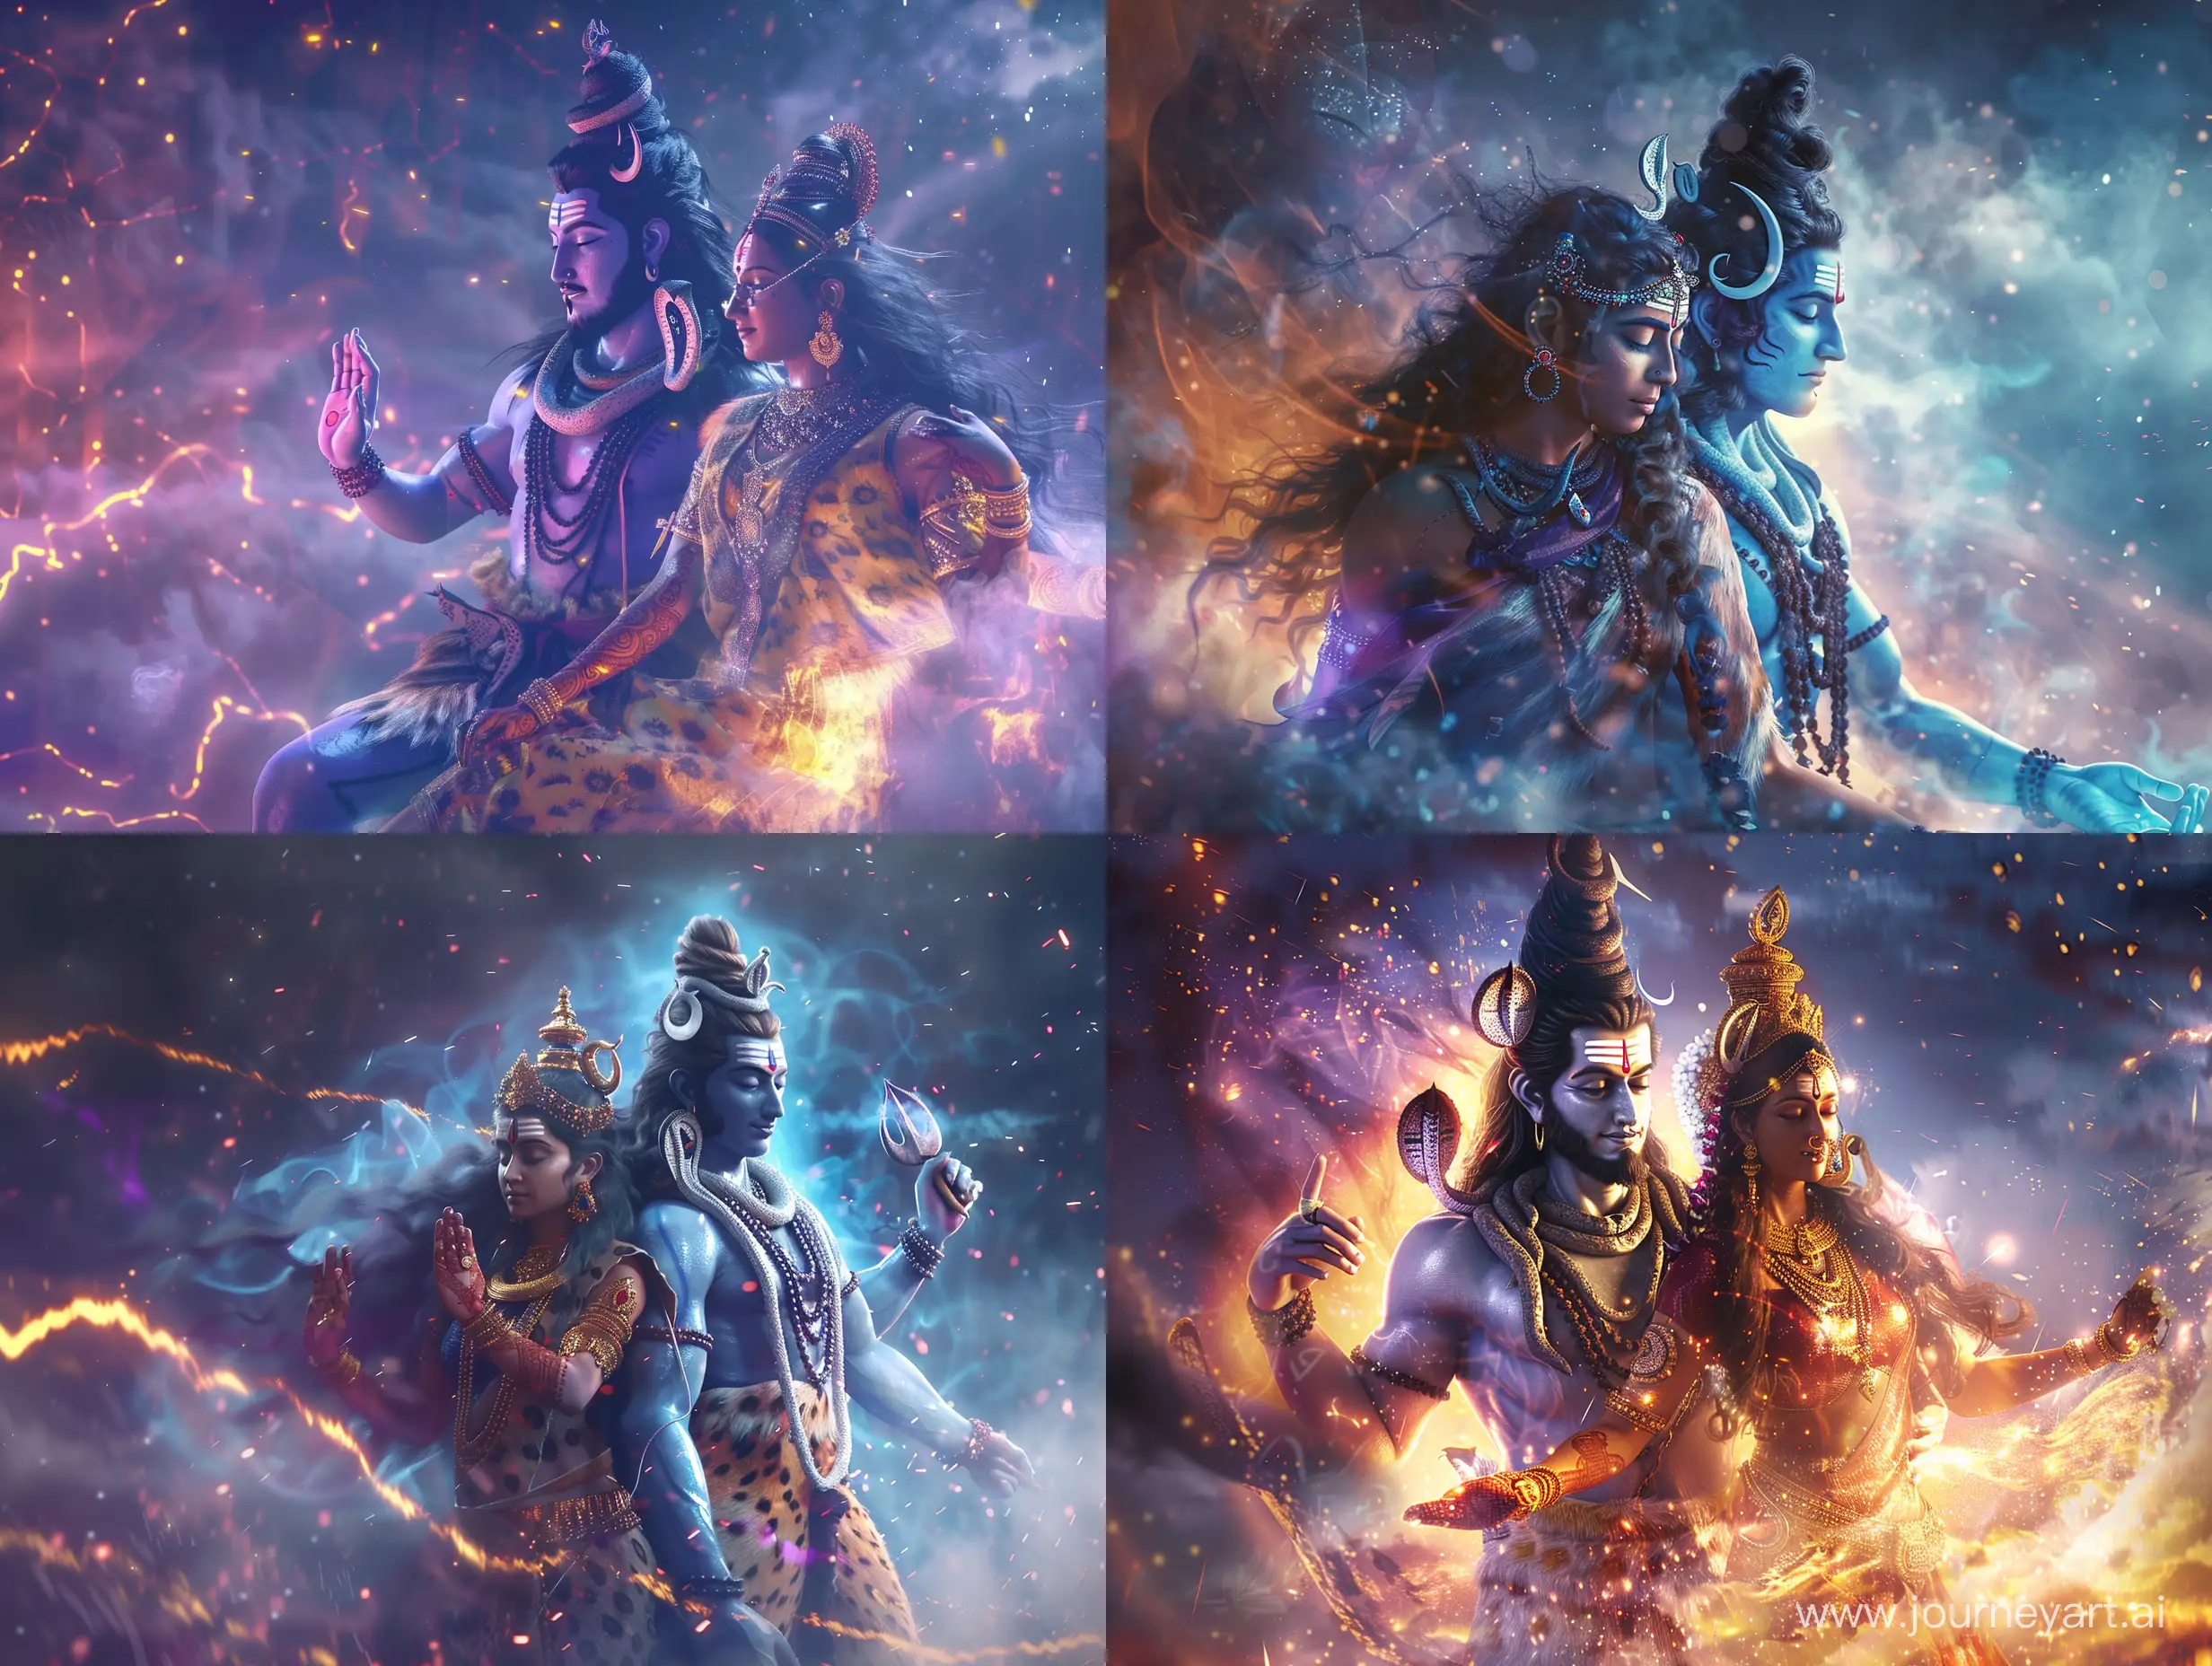 Divine-Journey-of-Lord-Shiva-and-Goddess-Parvati-amidst-Cosmic-Energies